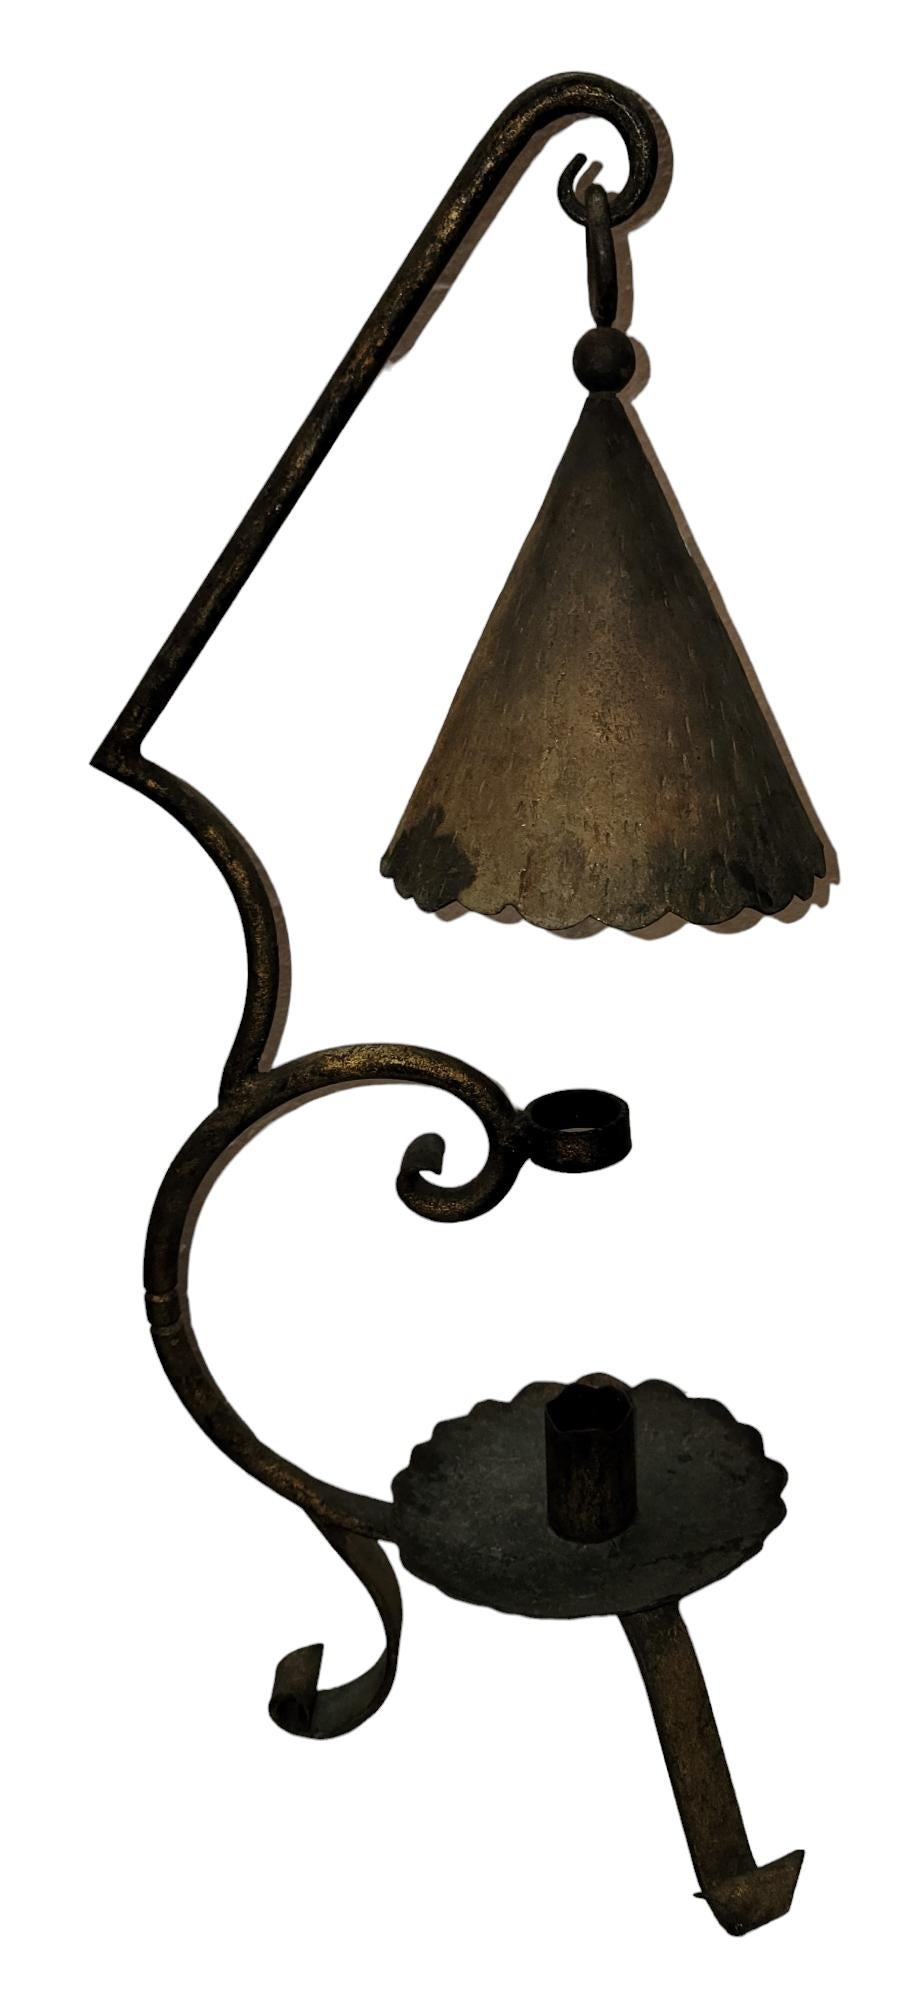 19thc Iron Candle Holder with hanging Diffuser. Measures approx - 10.5d x 10w x 27h
